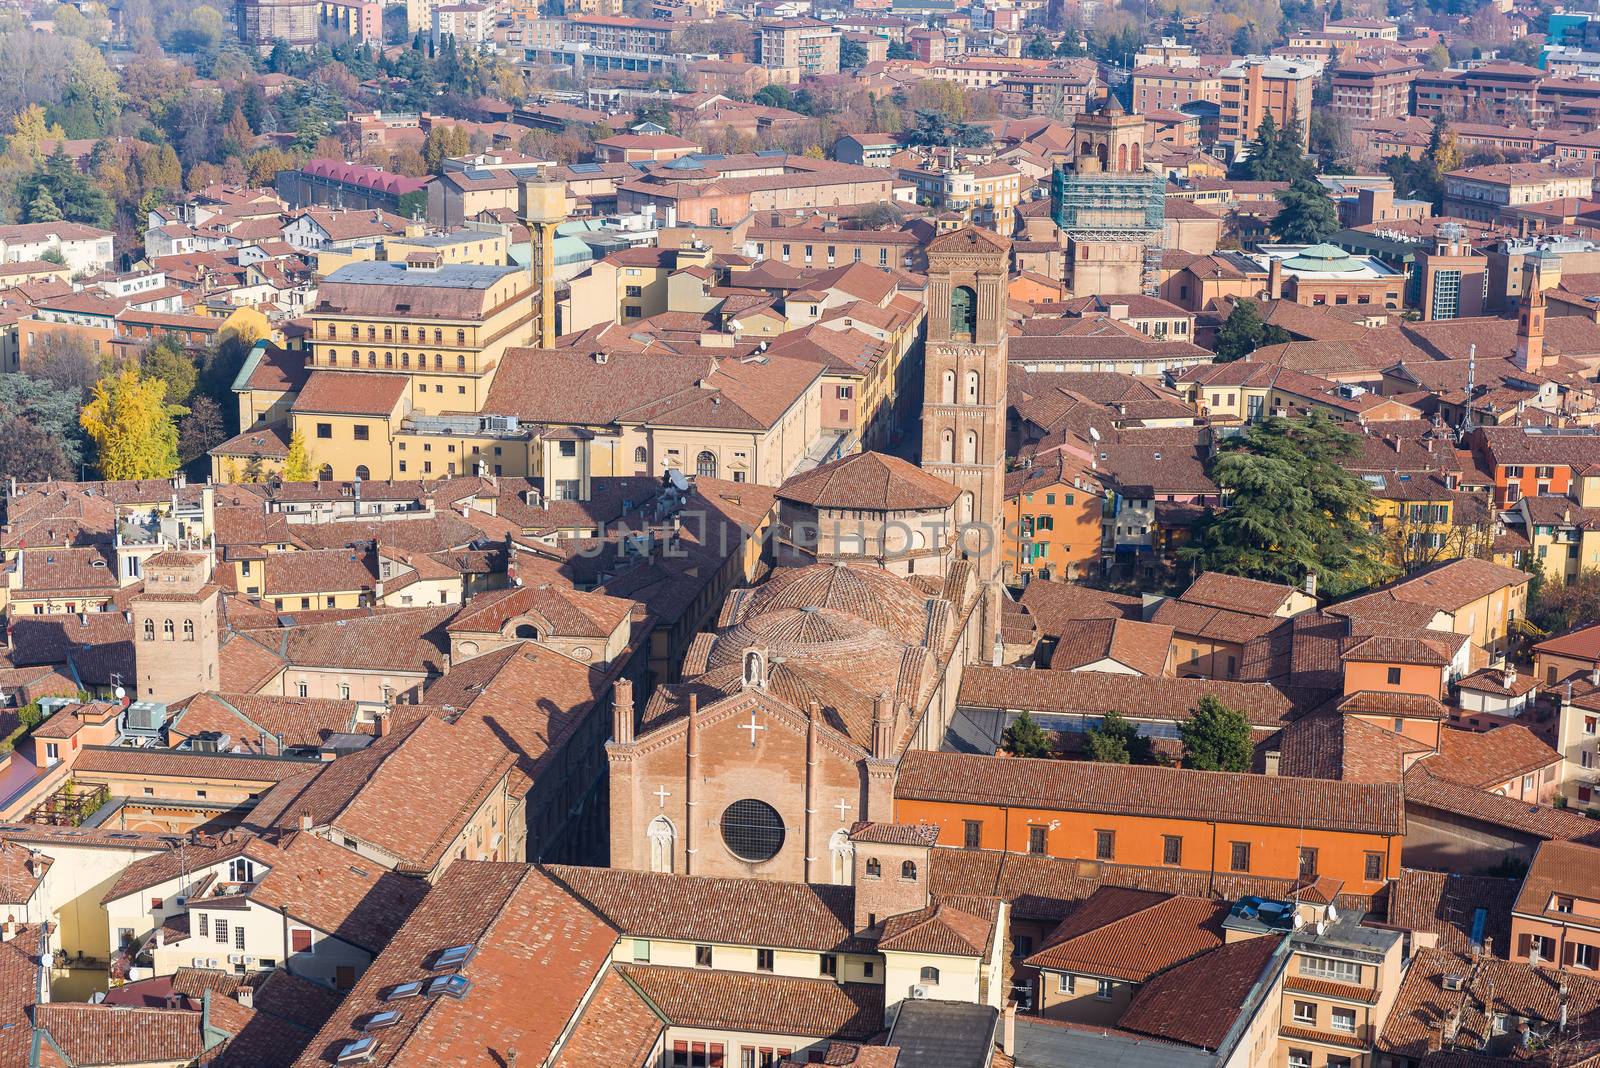 Panoramic view from the Torre degli Asinelli, over the old town of Bologna.